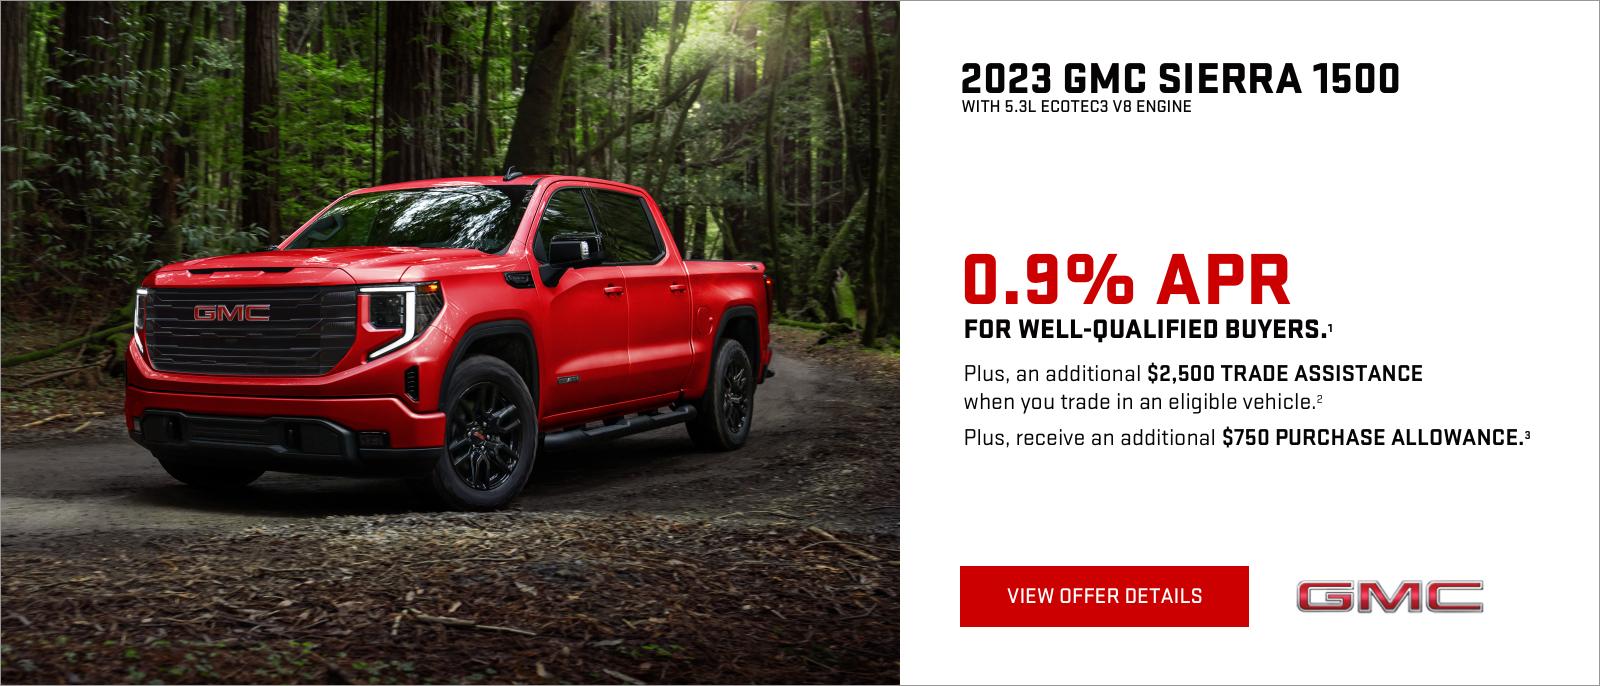 0.9% APR for well-qualified buyers.1

Plus, an additional $2,500 TRADE ASSISTANCE when you trade in an eligible vehicle.2

Plus, receive an additional $750 PURCHASE ALLOWANCE.3